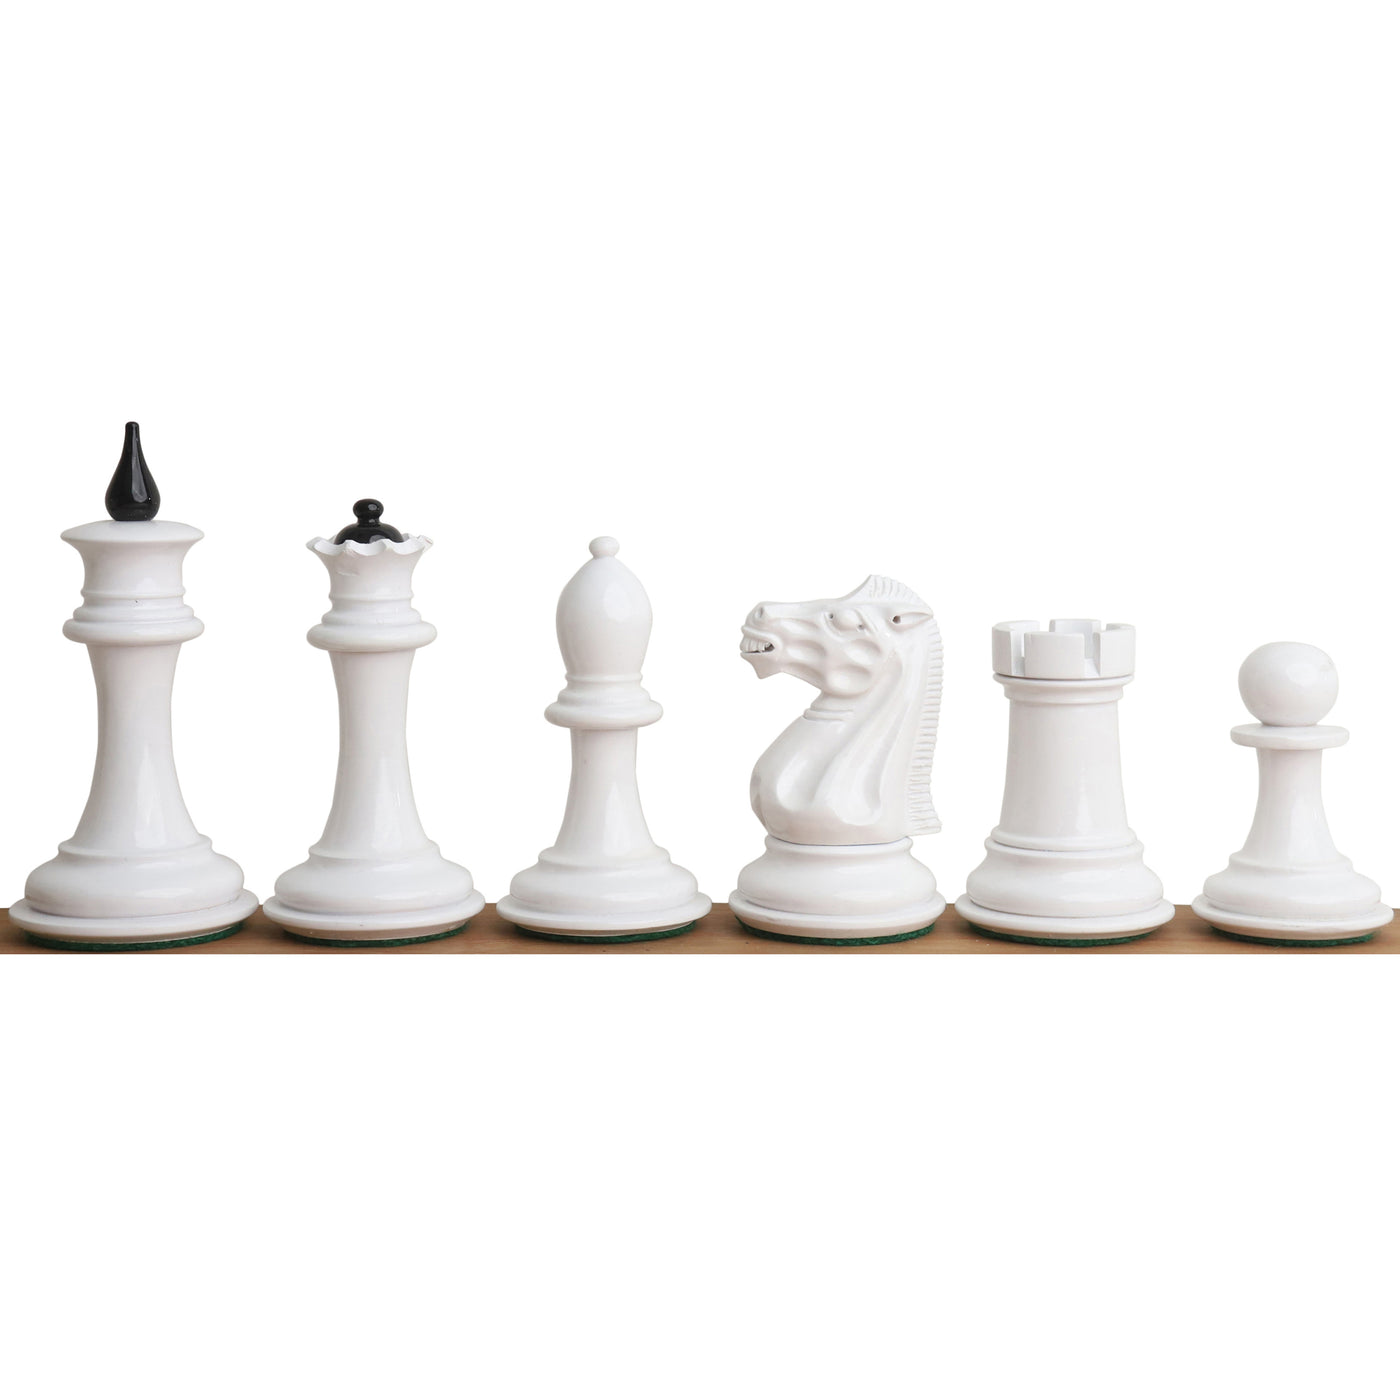 Slightly Imperfect 1940s' Soviet Reproduced Chess Pieces Only Set - Black and White Lacquer Boxwood